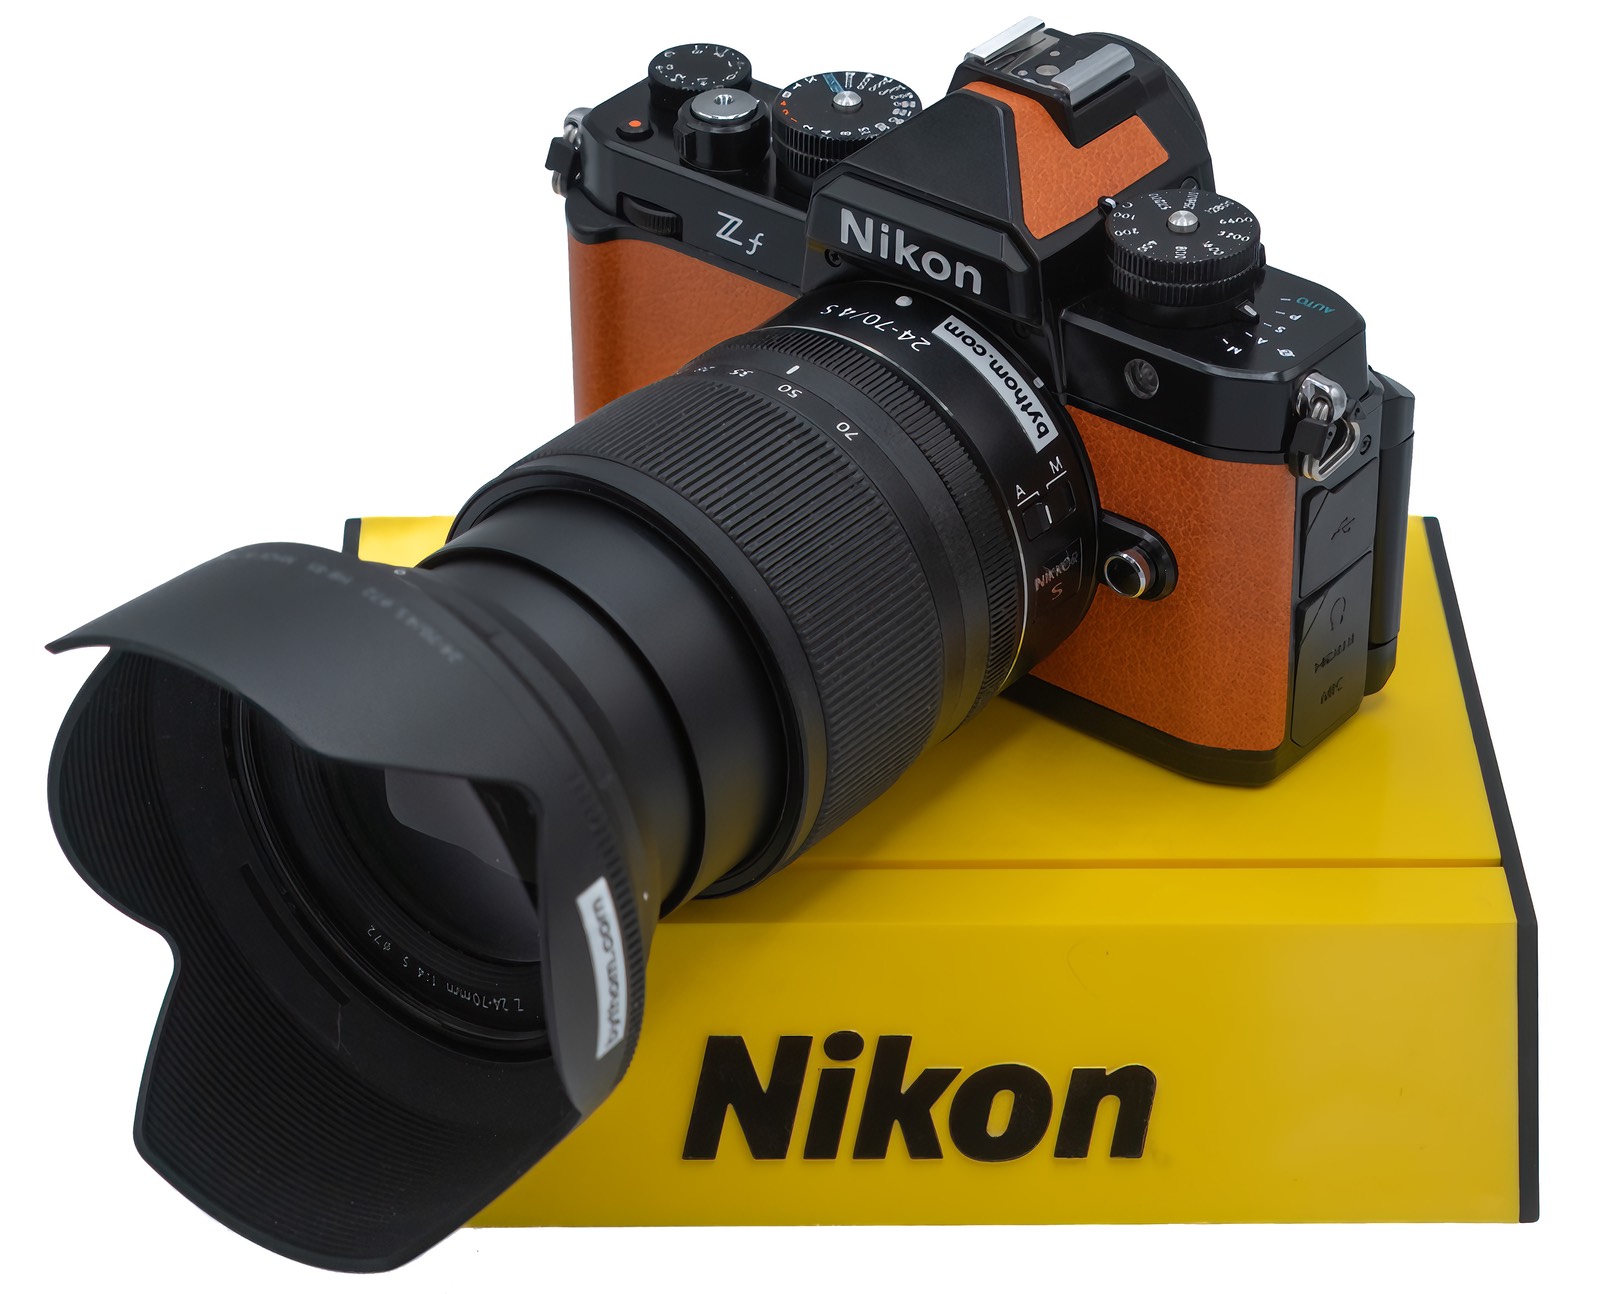 OFFICIAL Nikon Zf pREVIEW: INSANE IMAGE QUALITY, but a QUESTIONABLE choice?  